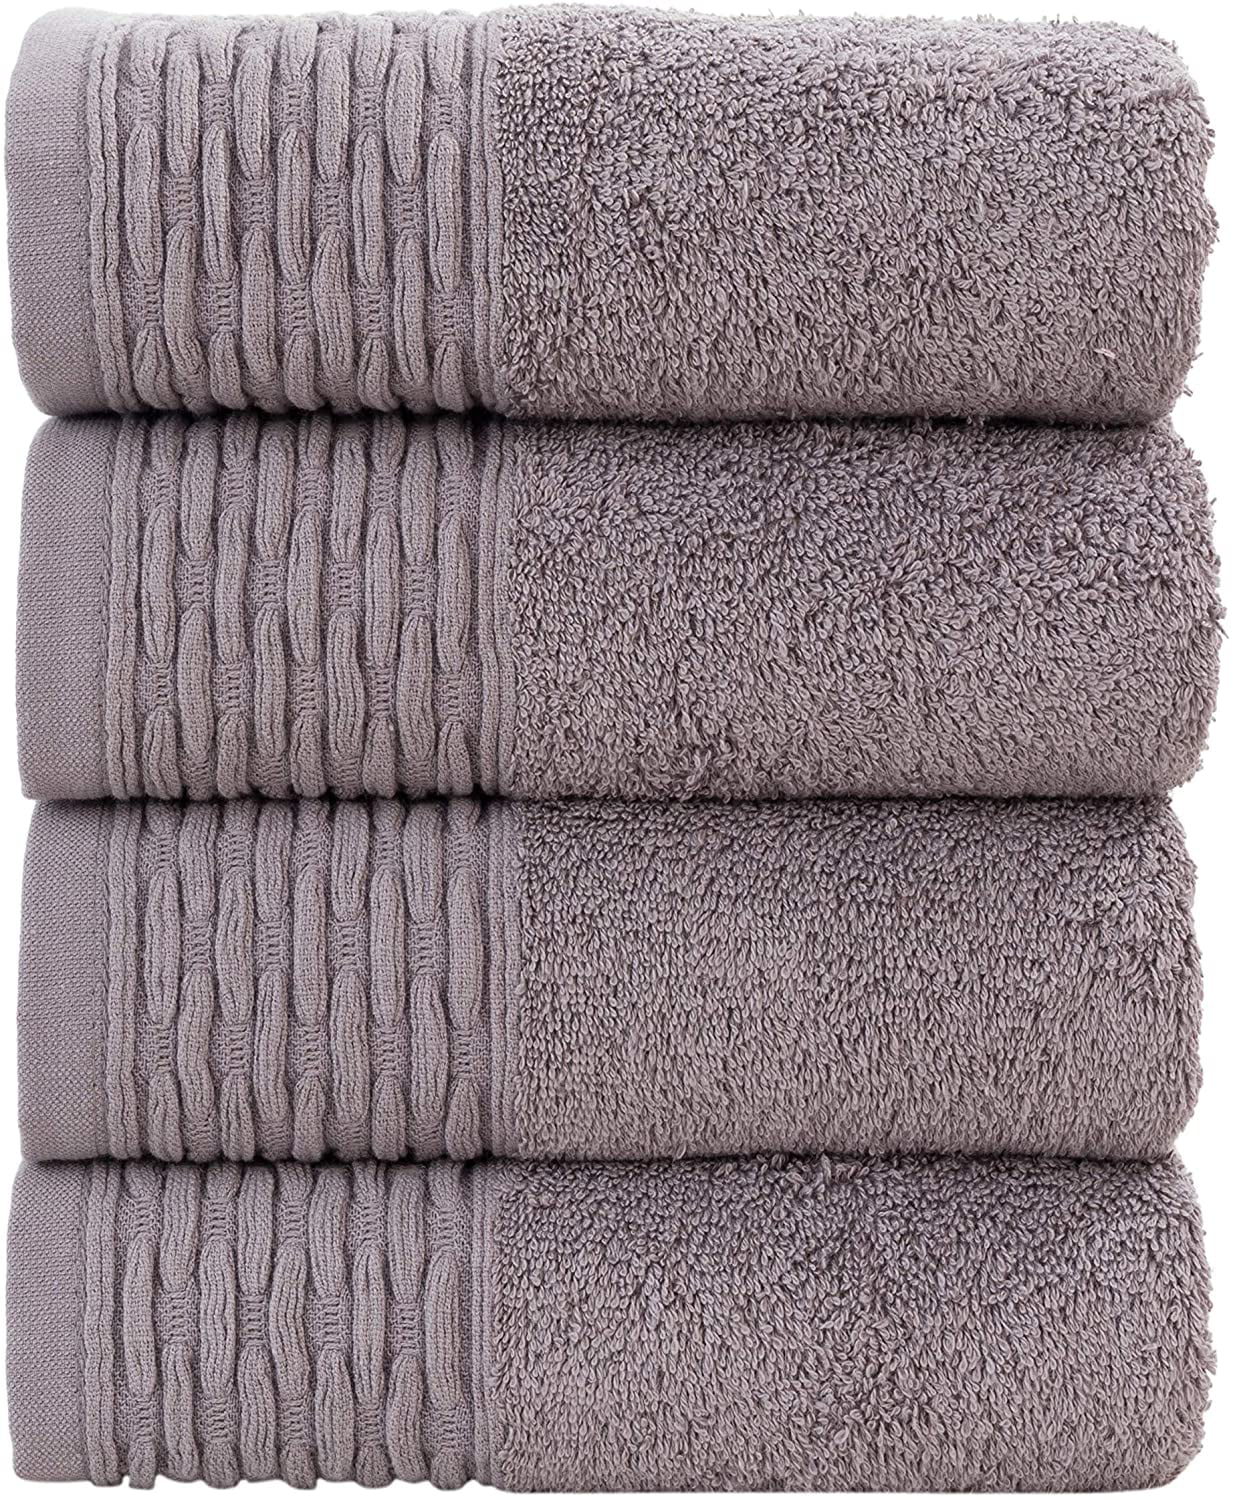 Details about   Trident White Collection 100% Cotton 600 GSM Highly Absorbent Bathroom Towel Set 